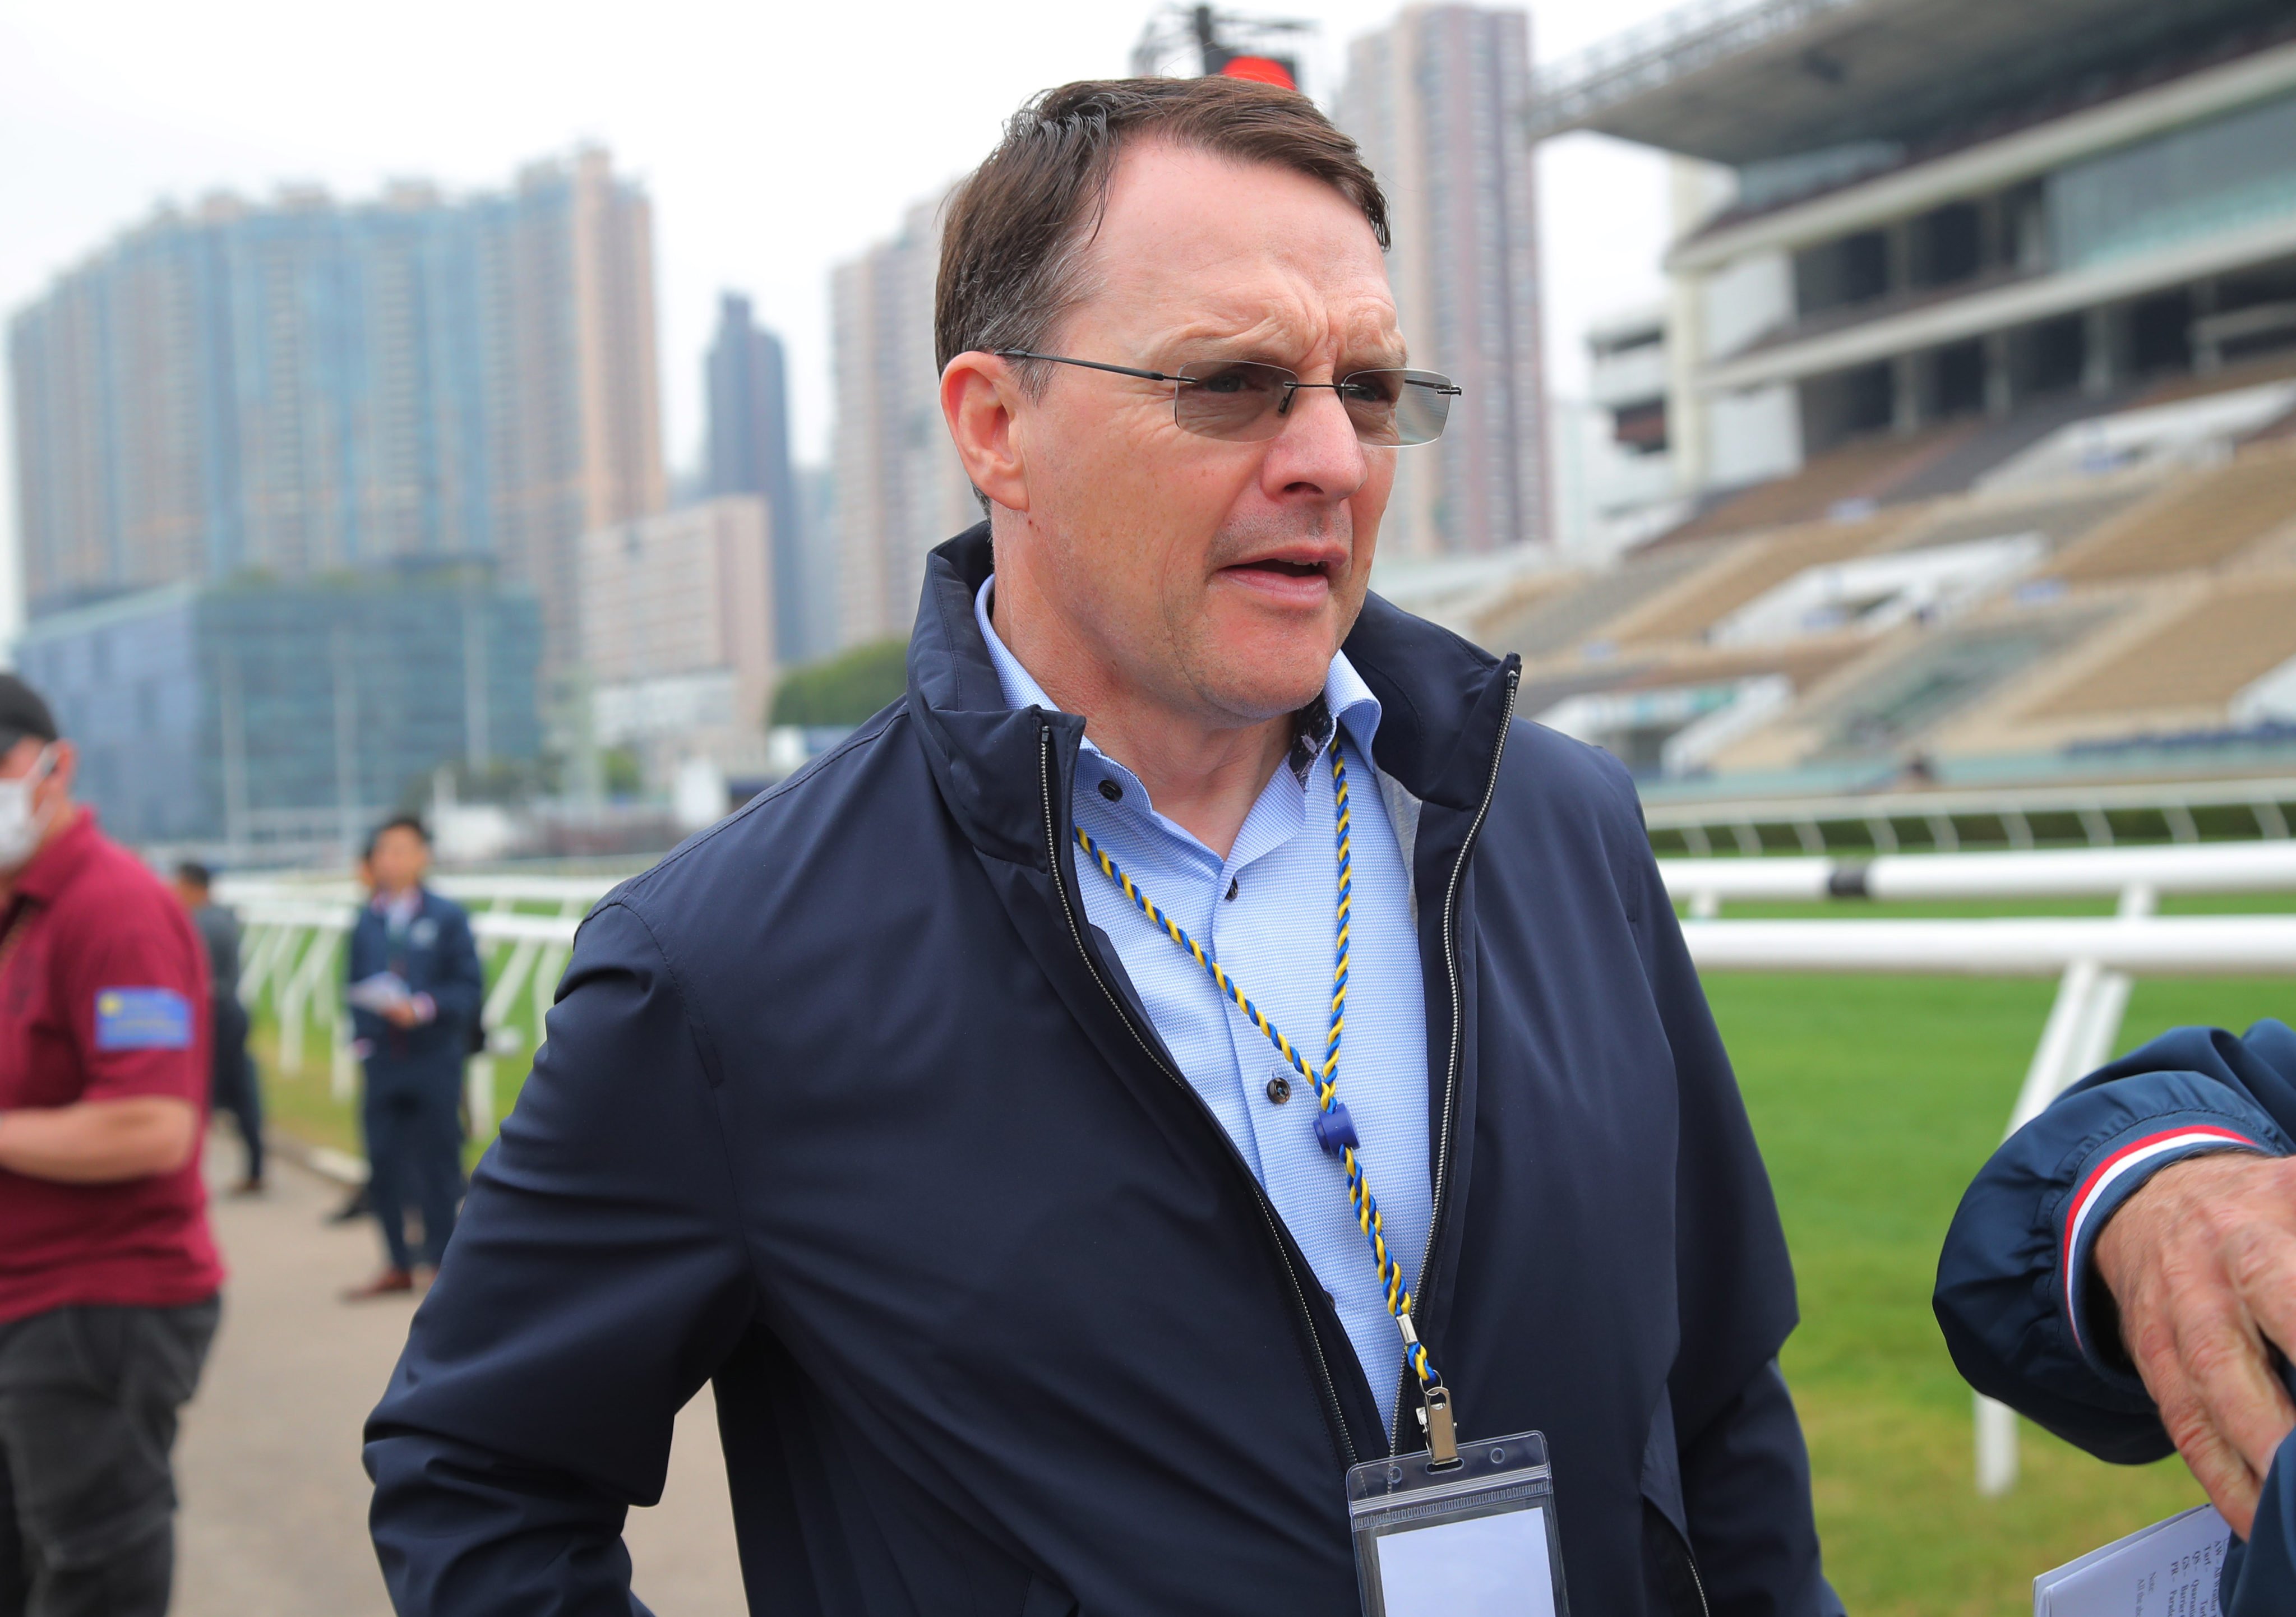 Aidan O’Brien, pictured at Sha Tin trackwork, has top claims on day three of Glorious Goodwood. Photos: Kenneth Chan